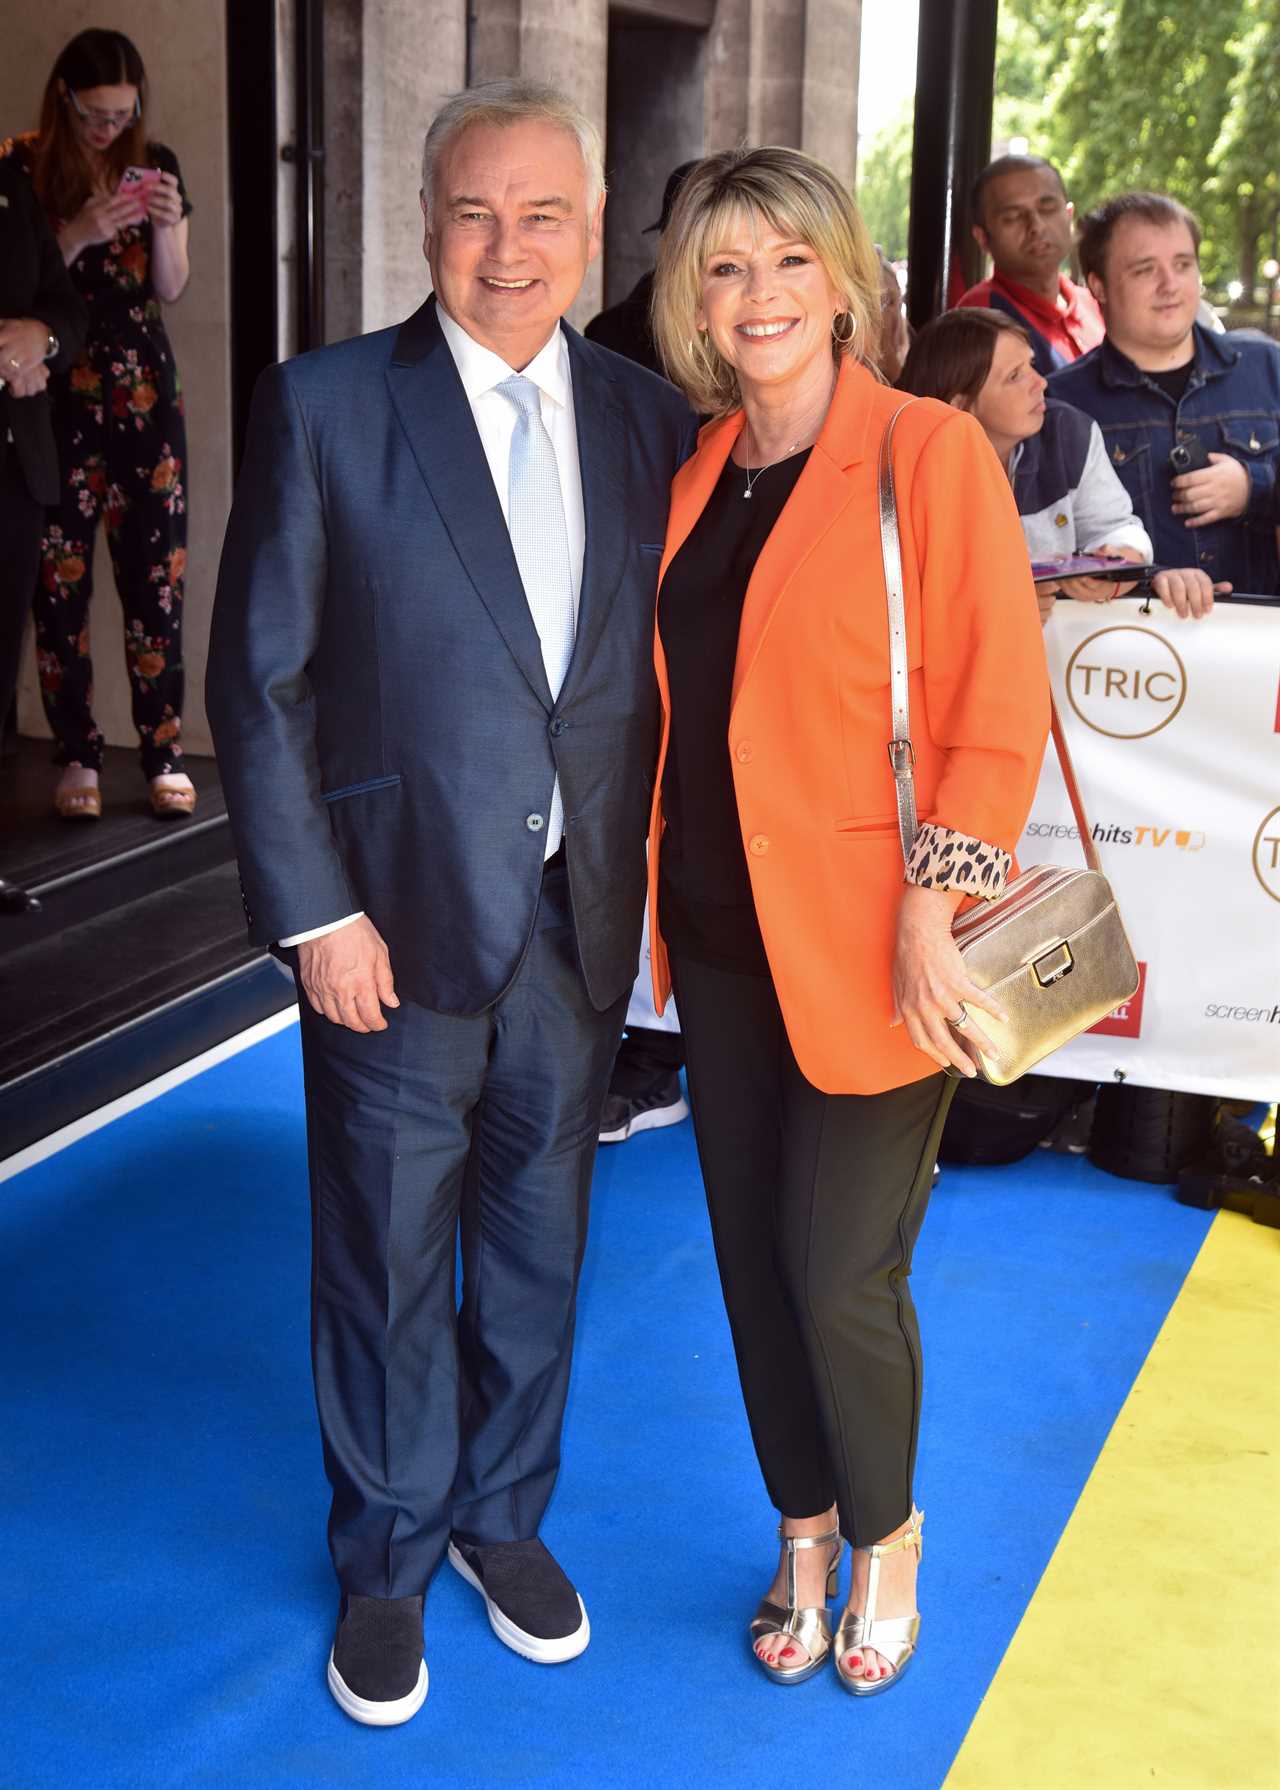 Eamonn Holmes and Ruth Langsford's Split: A Closer Look at Their Last Public Outing Together